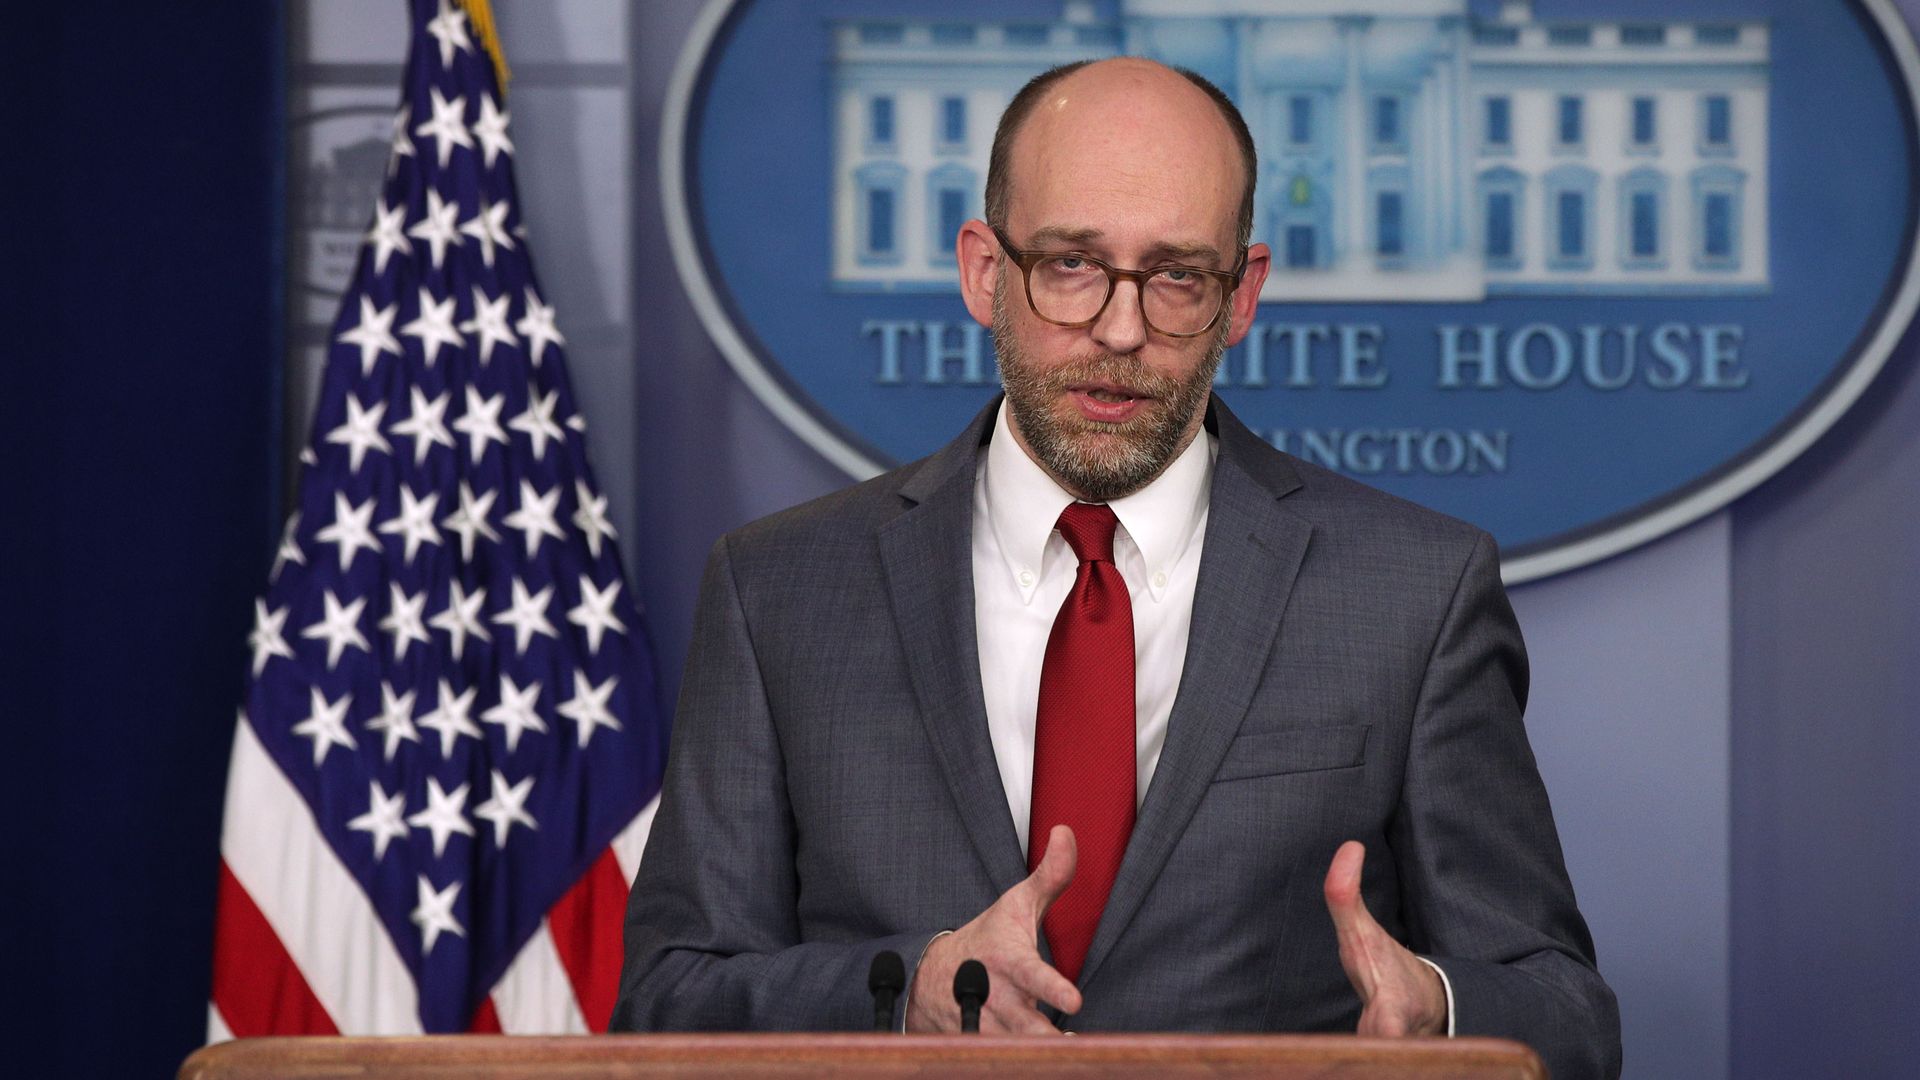 Acting Director of Office of Management and Budget Russell Vought speaks during a news briefing at the White House